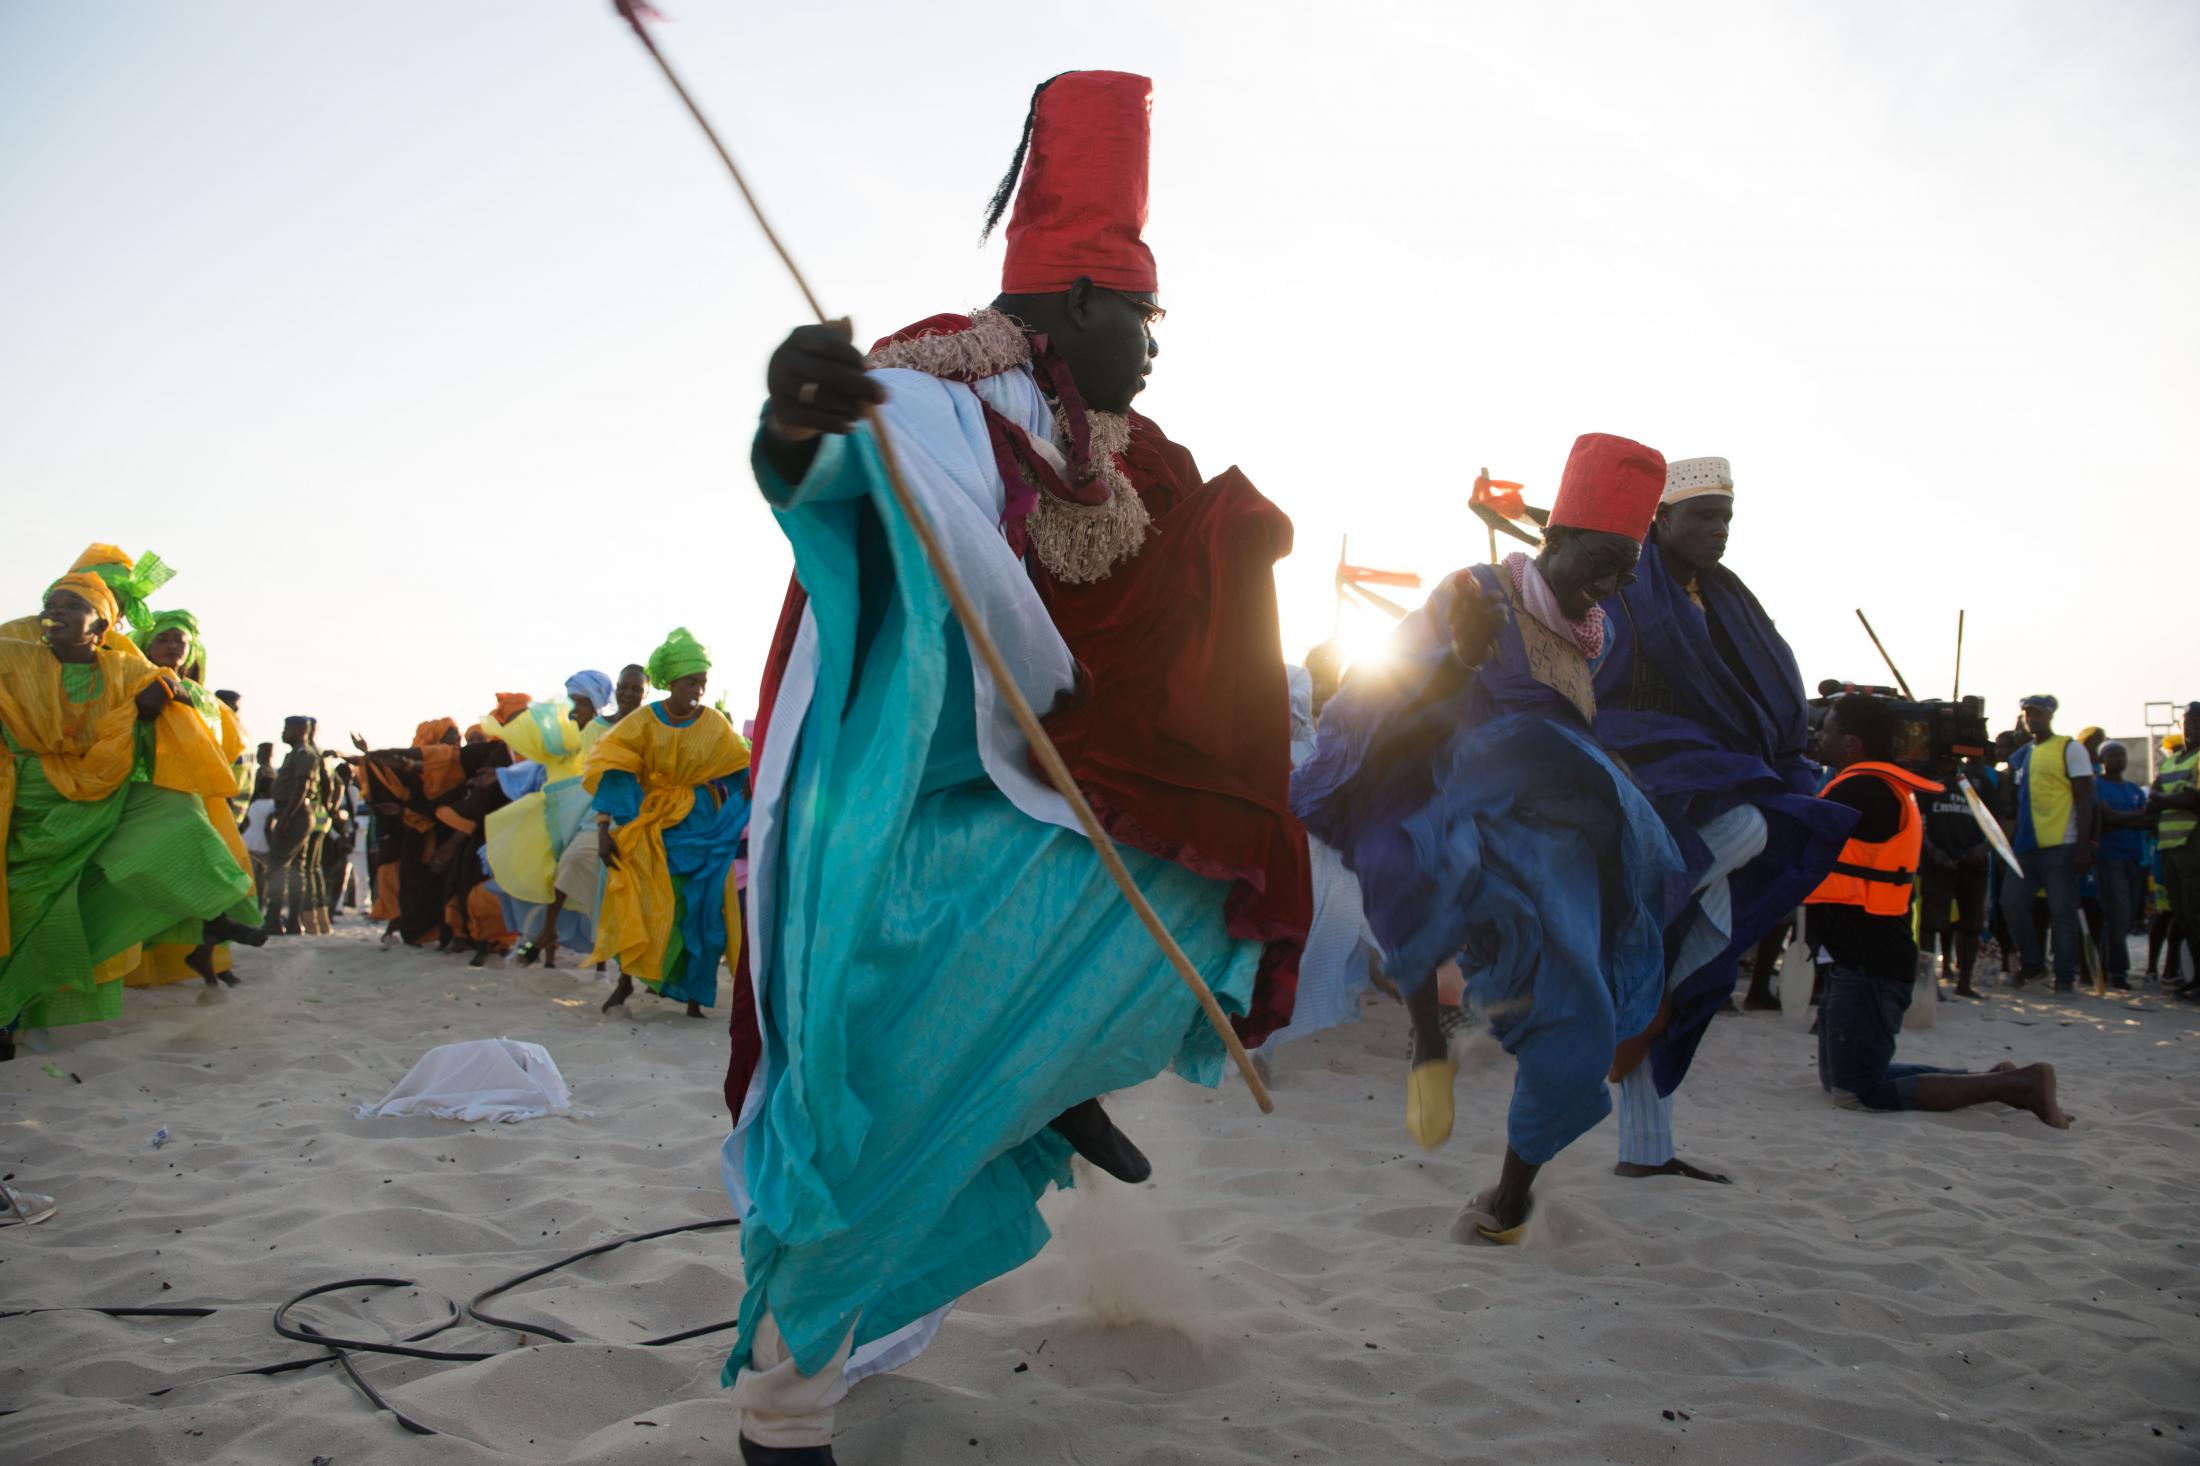 // The perfect stroke - Traditional music and dances as well as speeches by local...